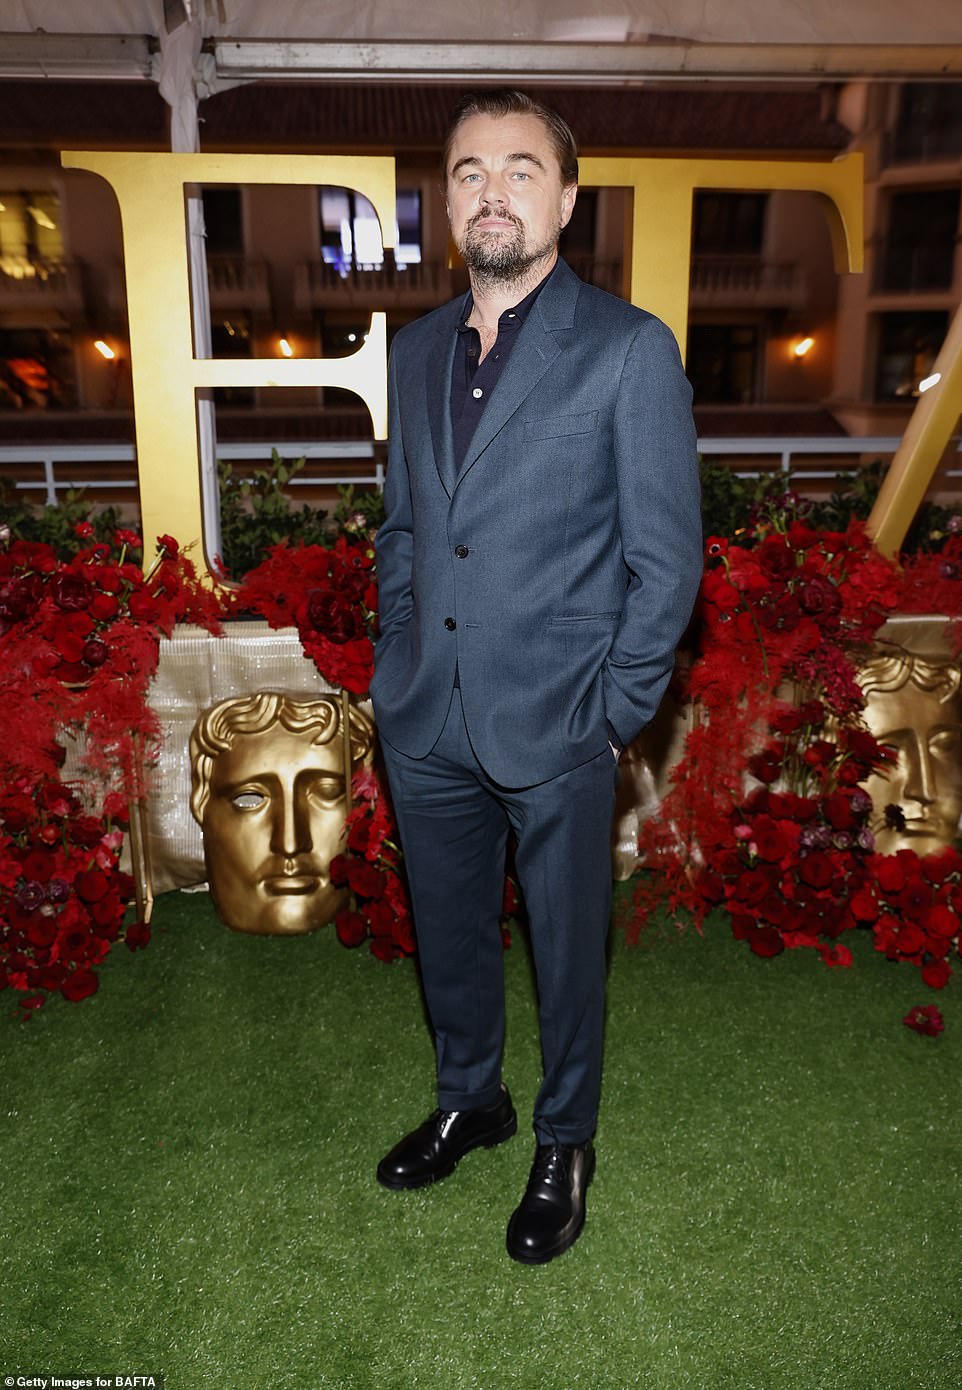 Leonardo DiCaprio donned a sleek, blue suit as well as a darker button up that was worn underneath at the event